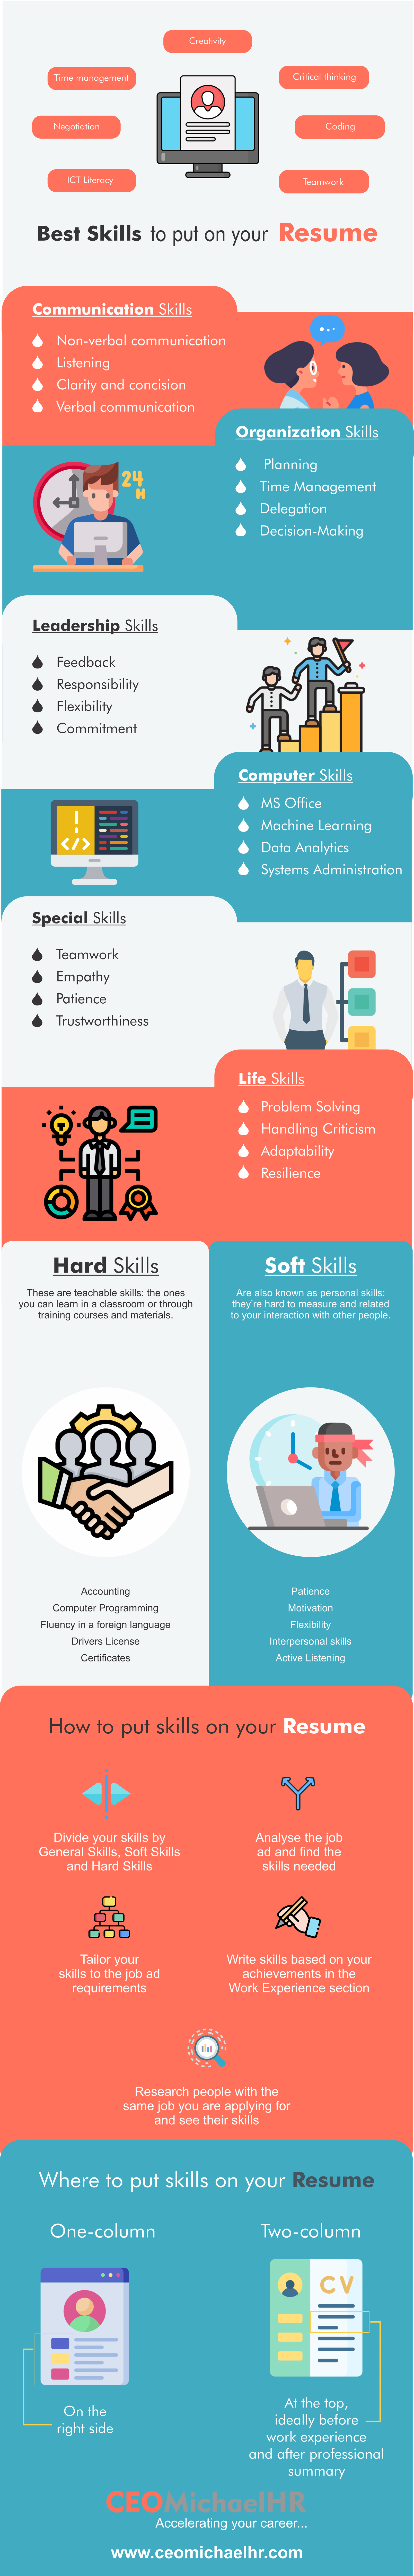 Skills to put on a resume- Infographic